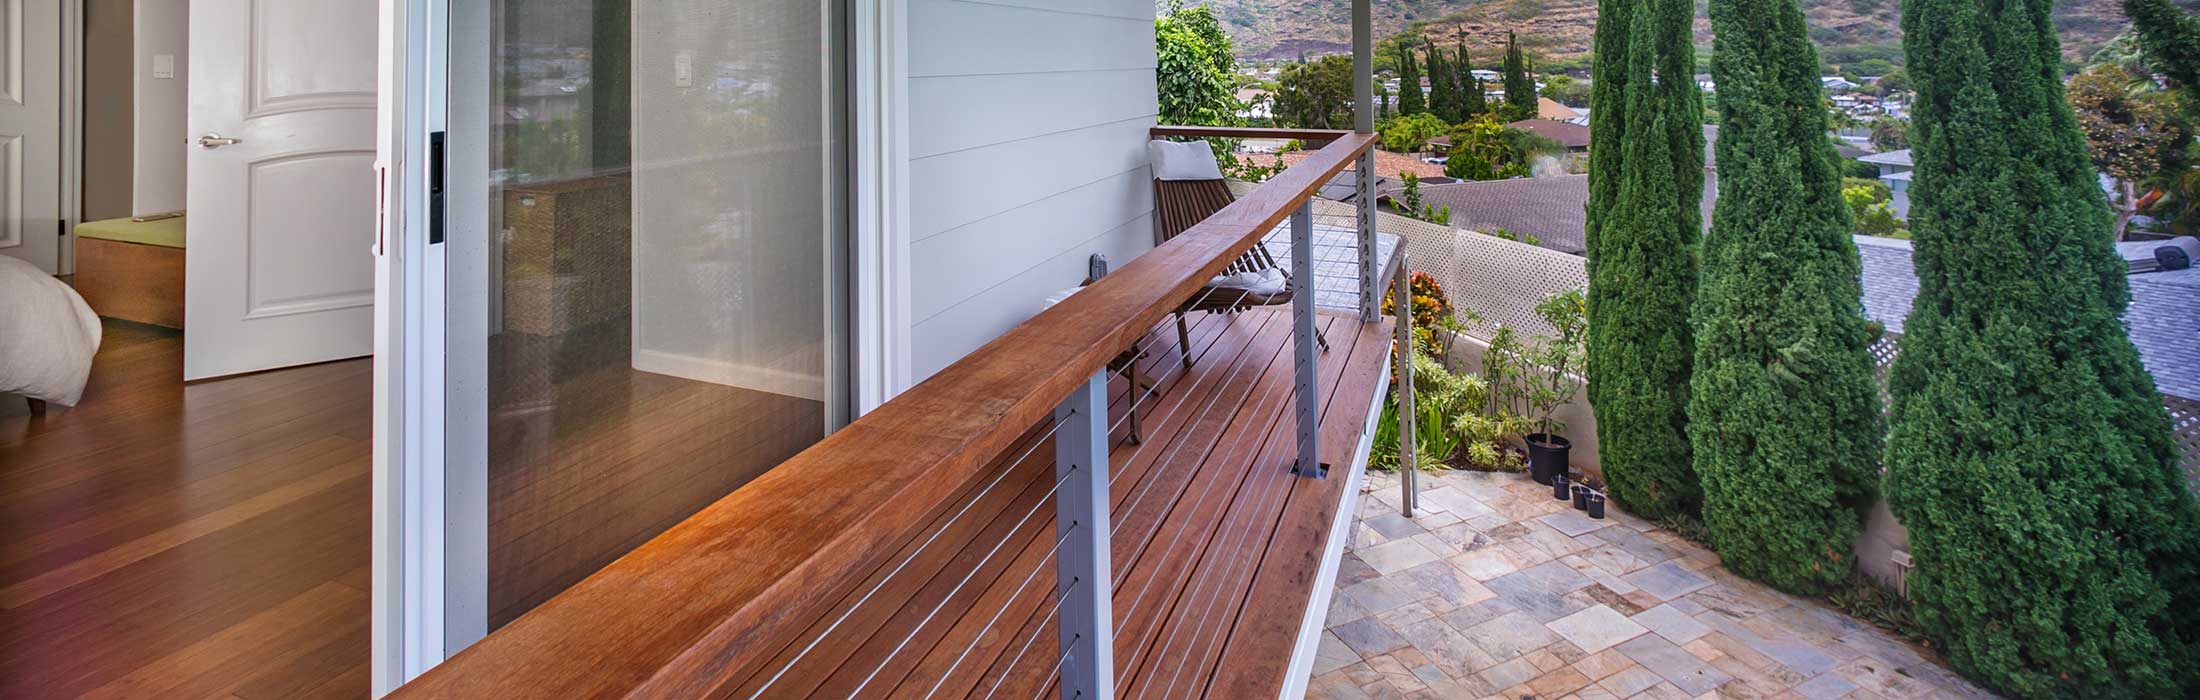 image of decking on home